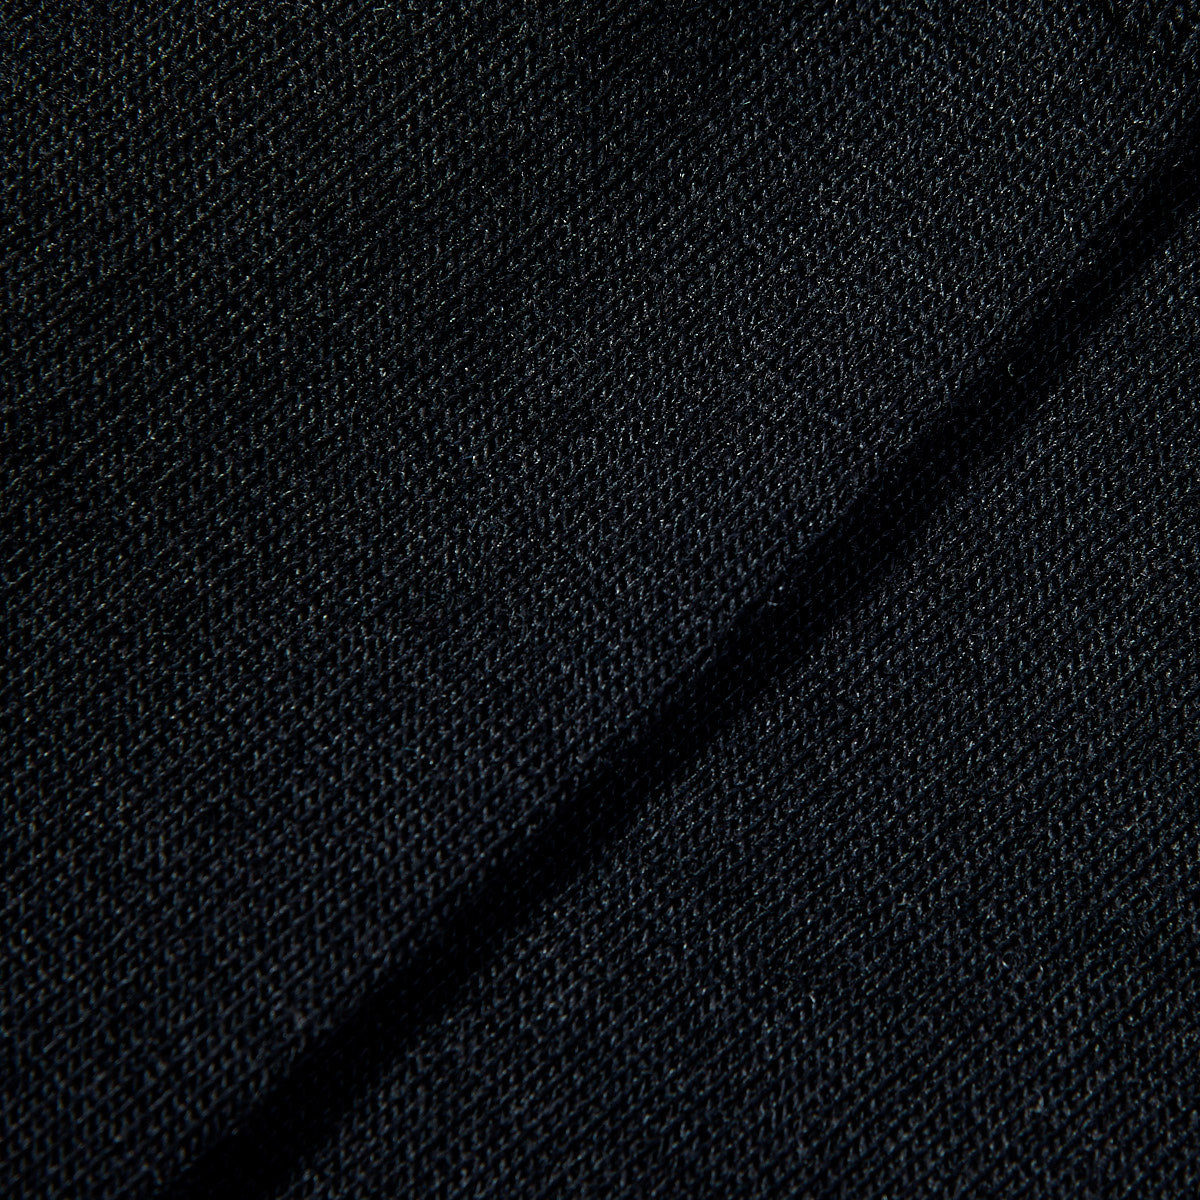 A close up image of a black Falke Airport Wool Cotton Socks sweater.